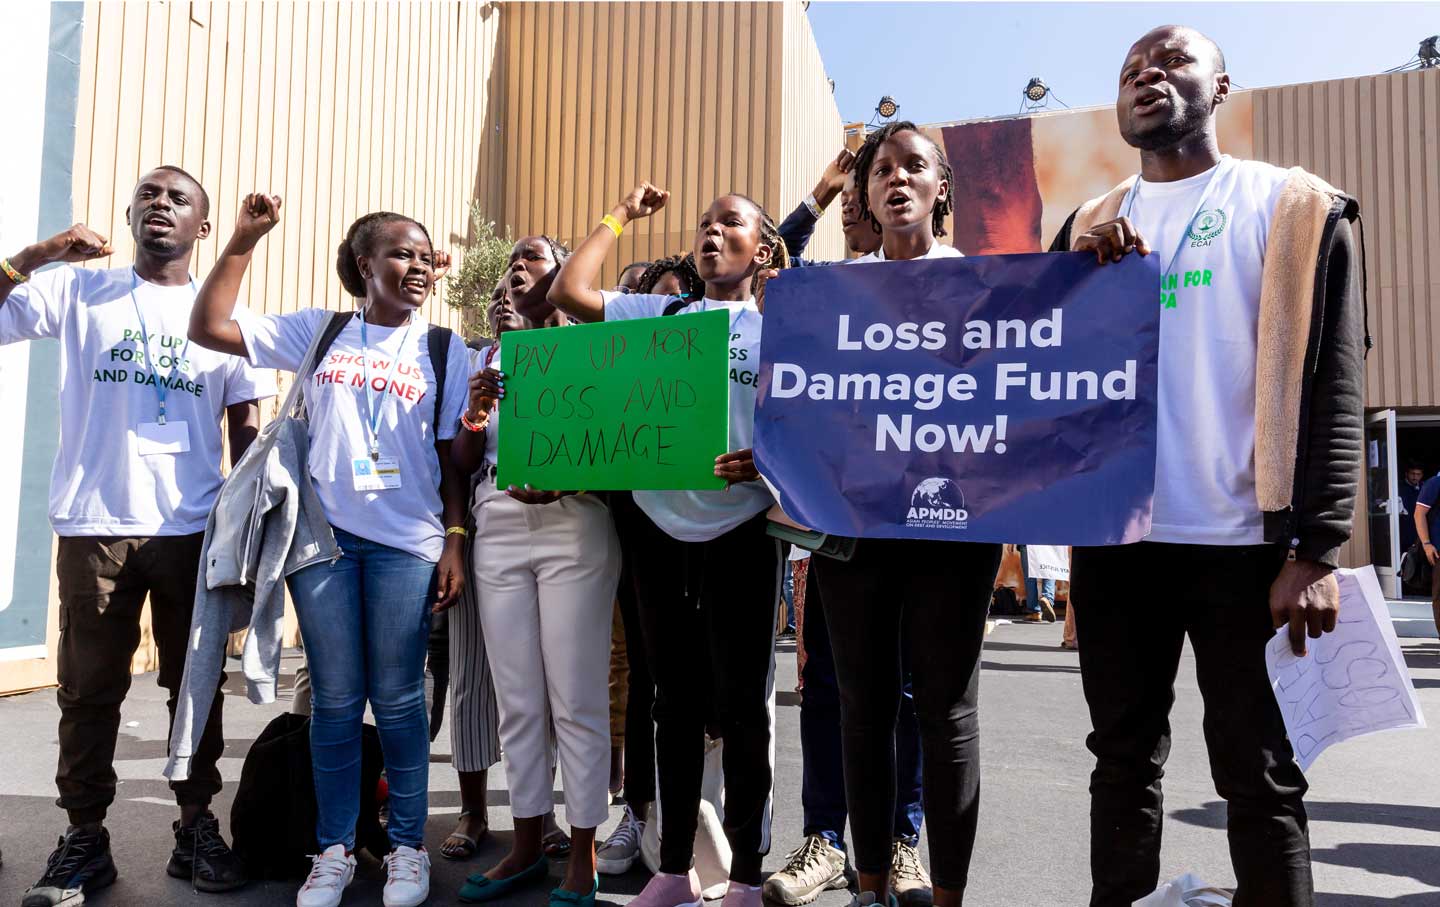 Young activists demand a Loss and Damage Fund to compensate developing countries for the impacts of climate change